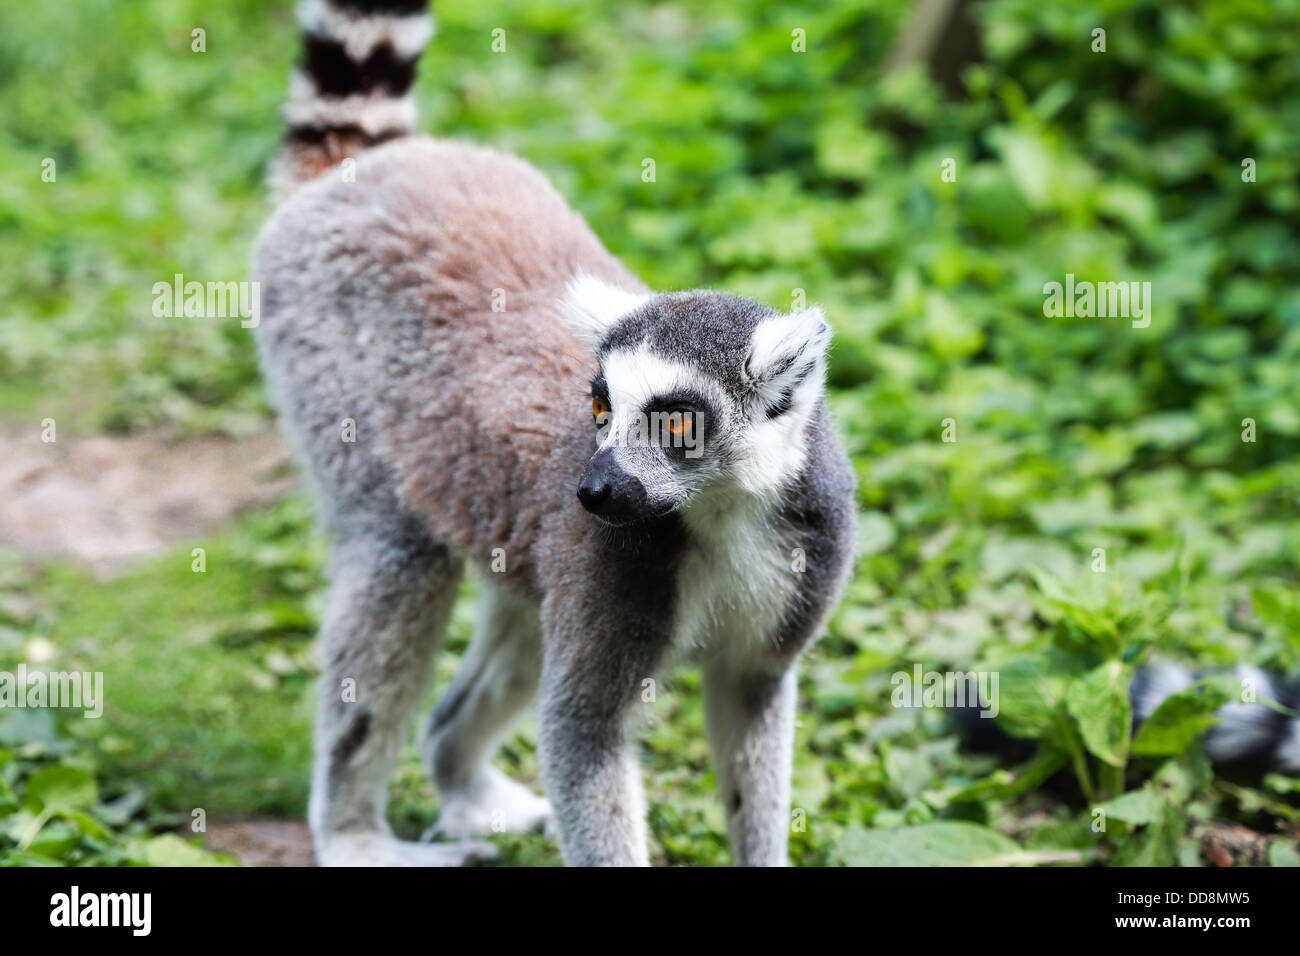 One lemur standing in the forest. Big orange eyes. Focused on the animal,  background is out of focus Stock Photo - Alamy